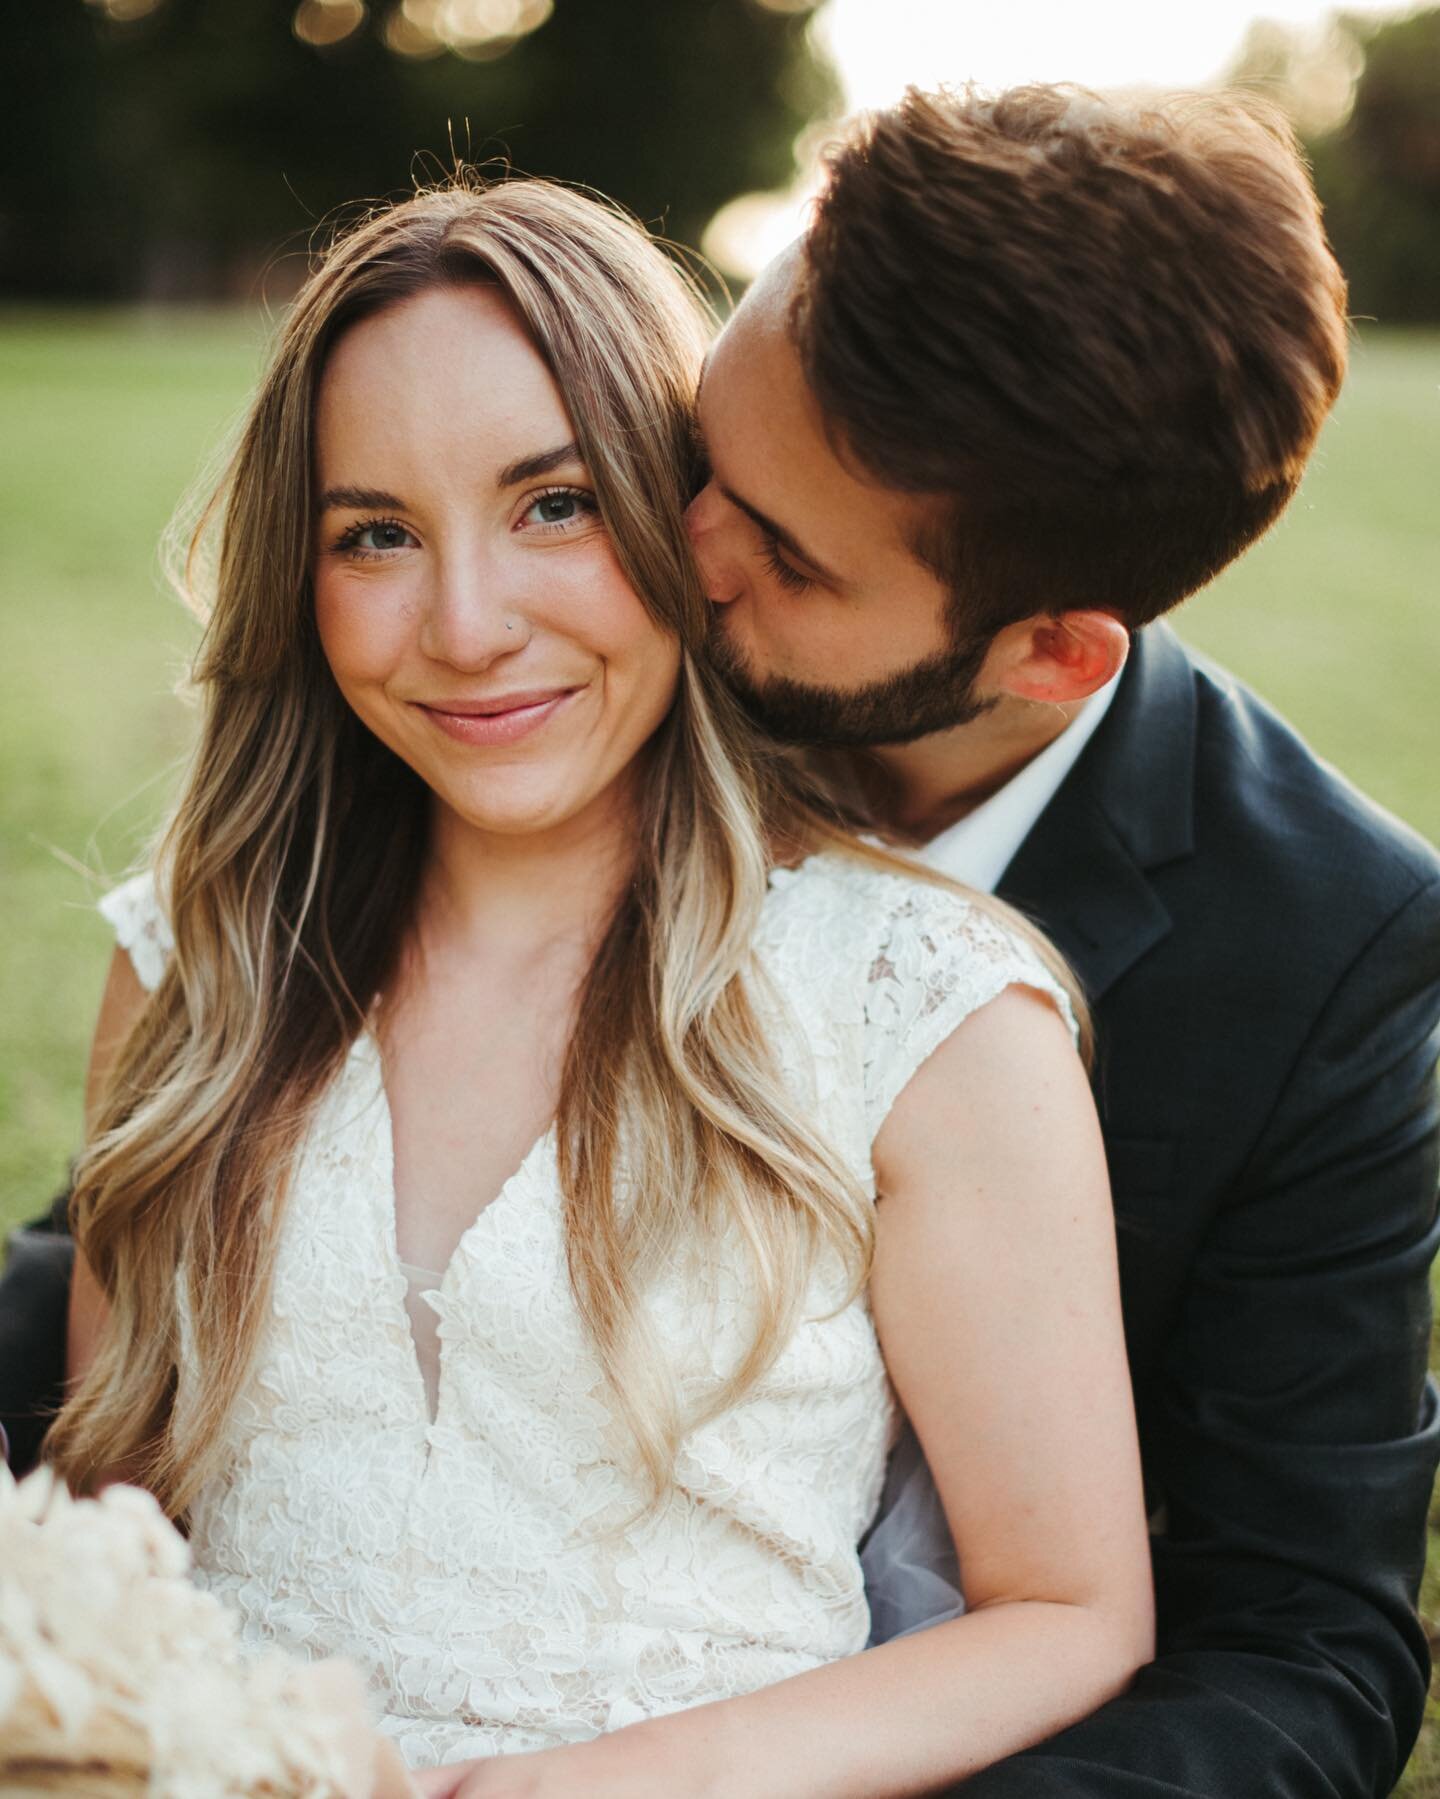 I seriously cannot get over how incredible being able to photograph love is!!!! Like oh my goodness, every time I&rsquo;m editing each gallery, I get this smile because it&rsquo;s so beautiful how different and unique each couples connection is ✨✨